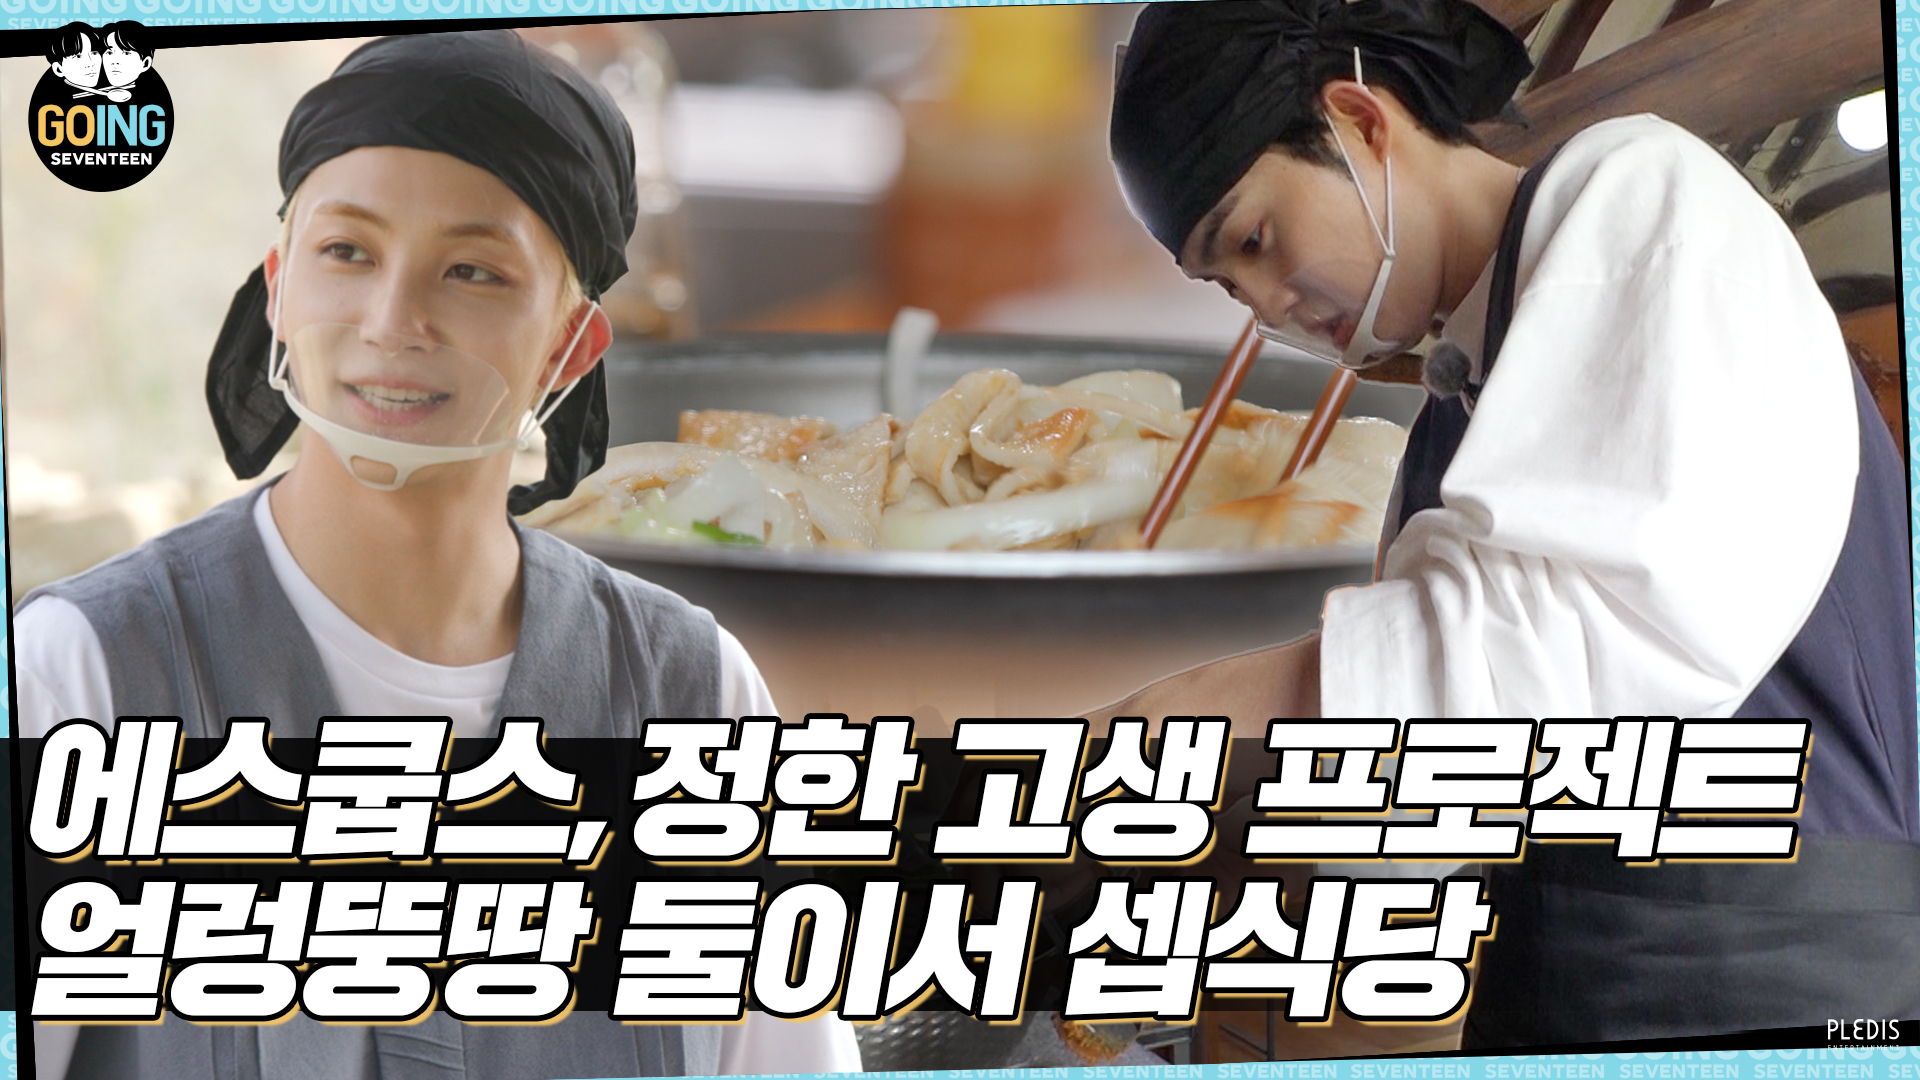 [GOING SEVENTEEN] EP.33 둘이서 셉식당 #1 (SVT’s Kitchen for Two #1)